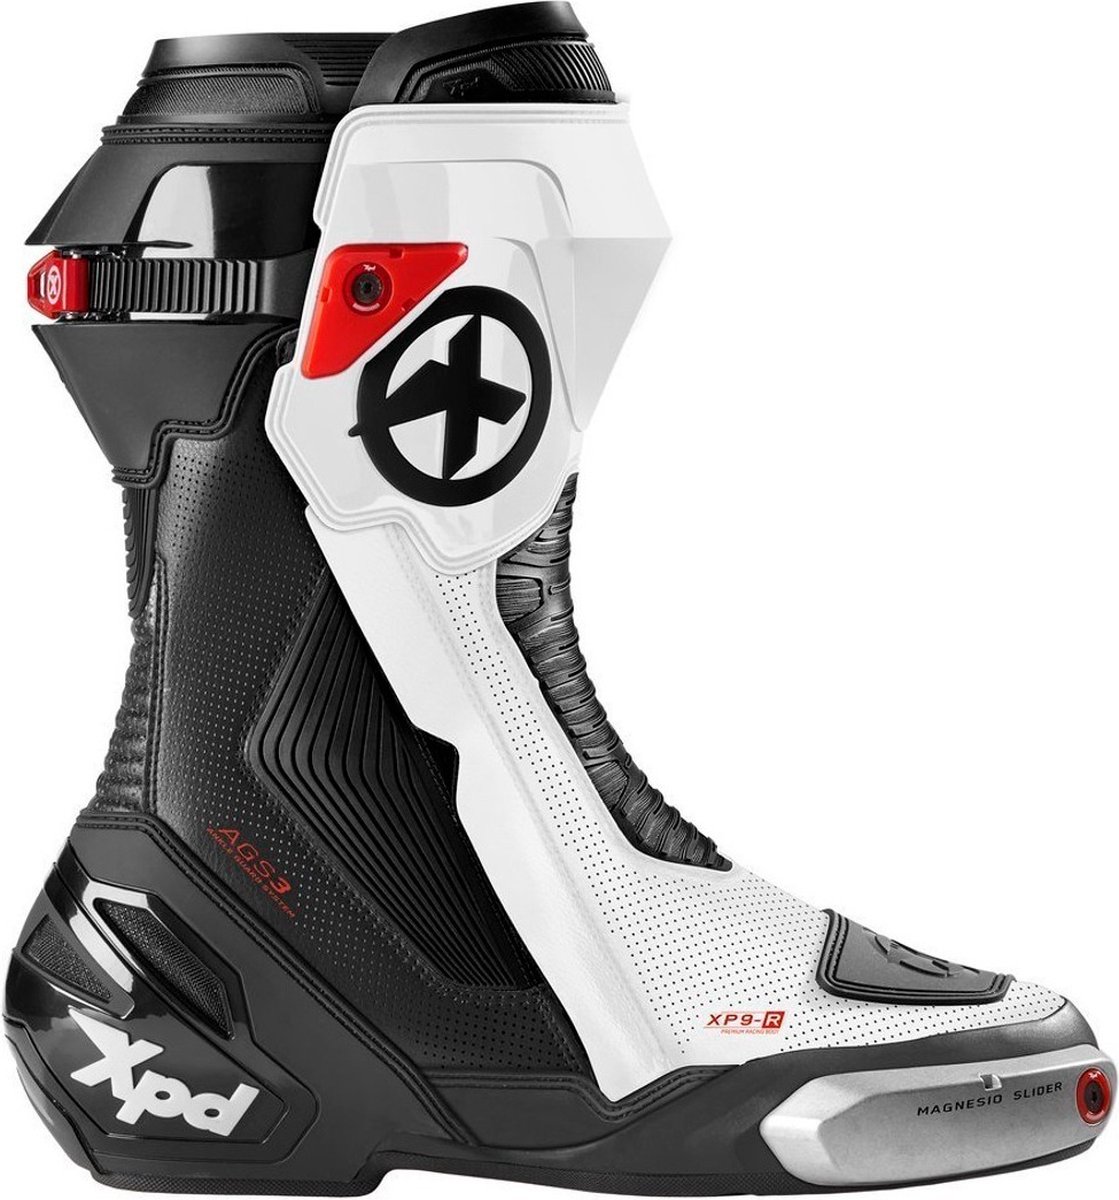 XPD XP-9 R BLACK WHITE BOOTS 48 - Maat - Laars